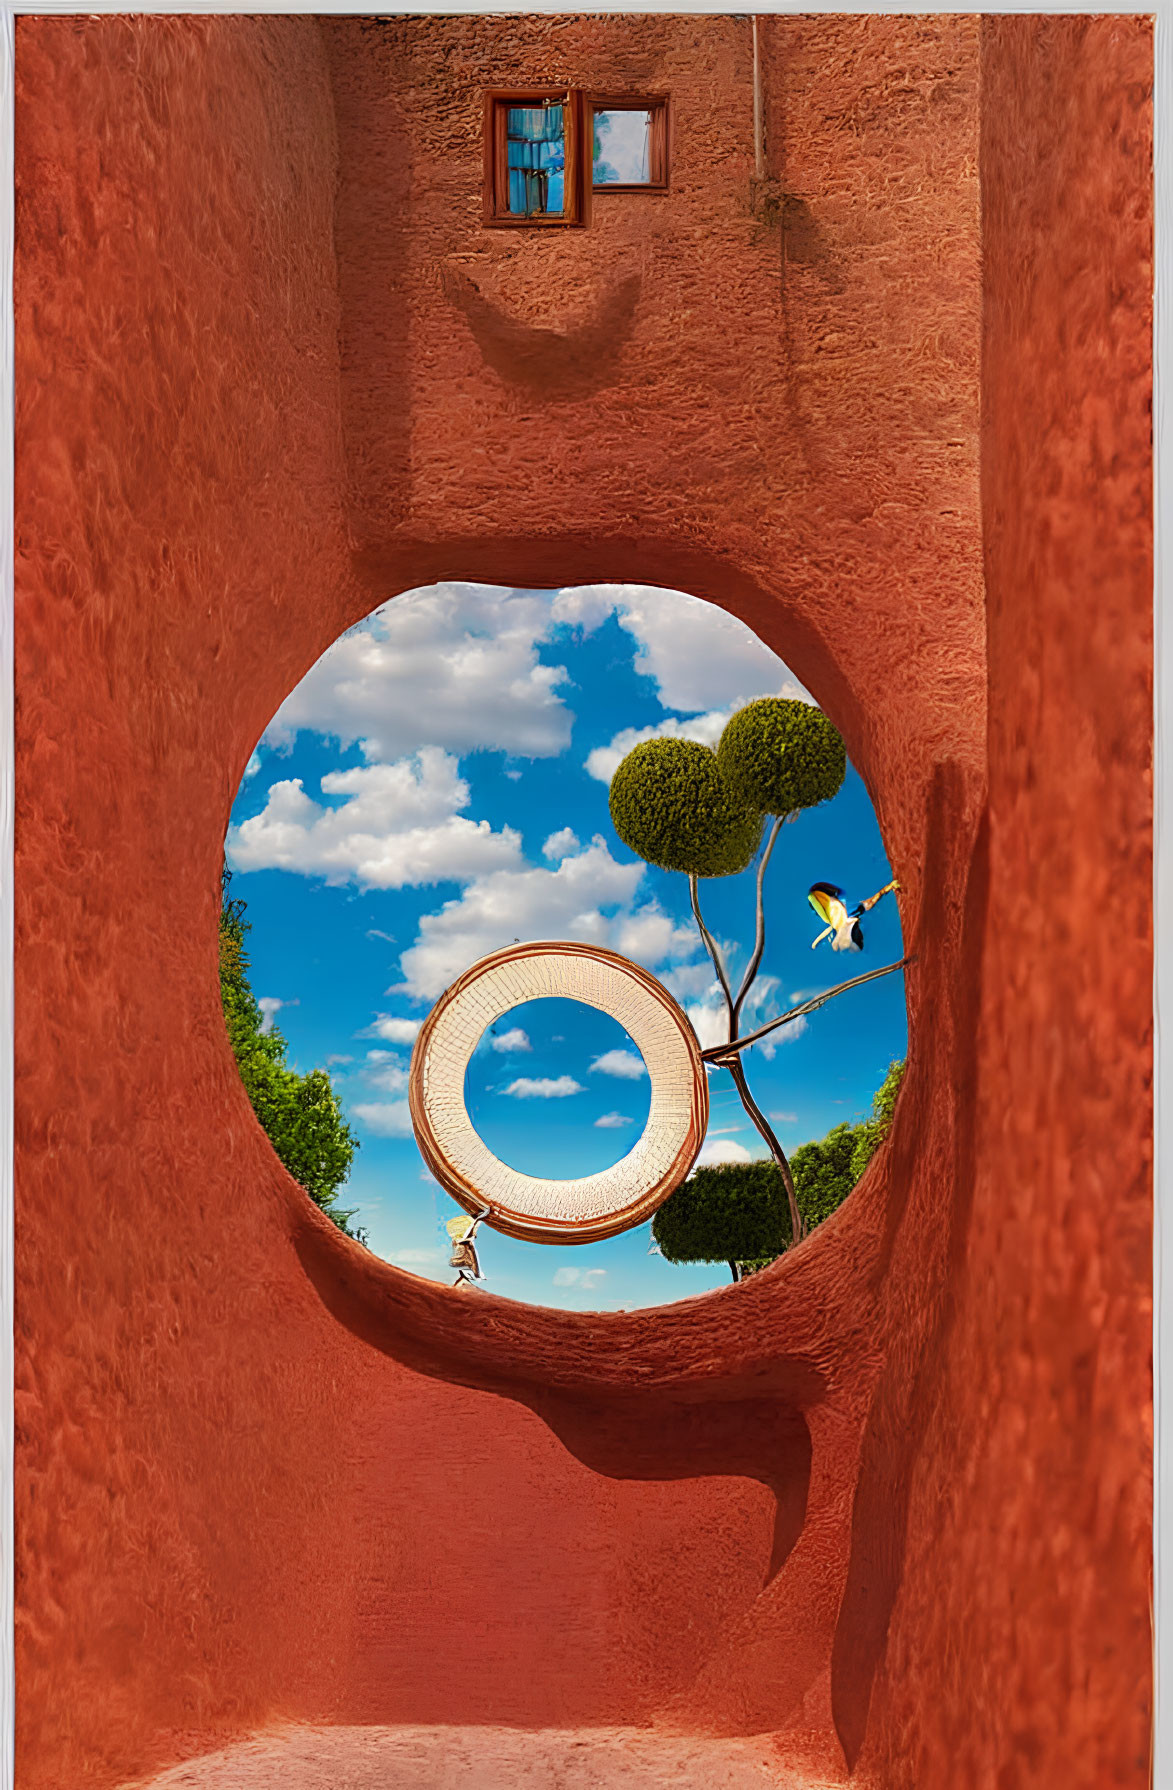 Surreal keyhole-shaped tunnel in red earth leads to whimsical scene with floating rings, running